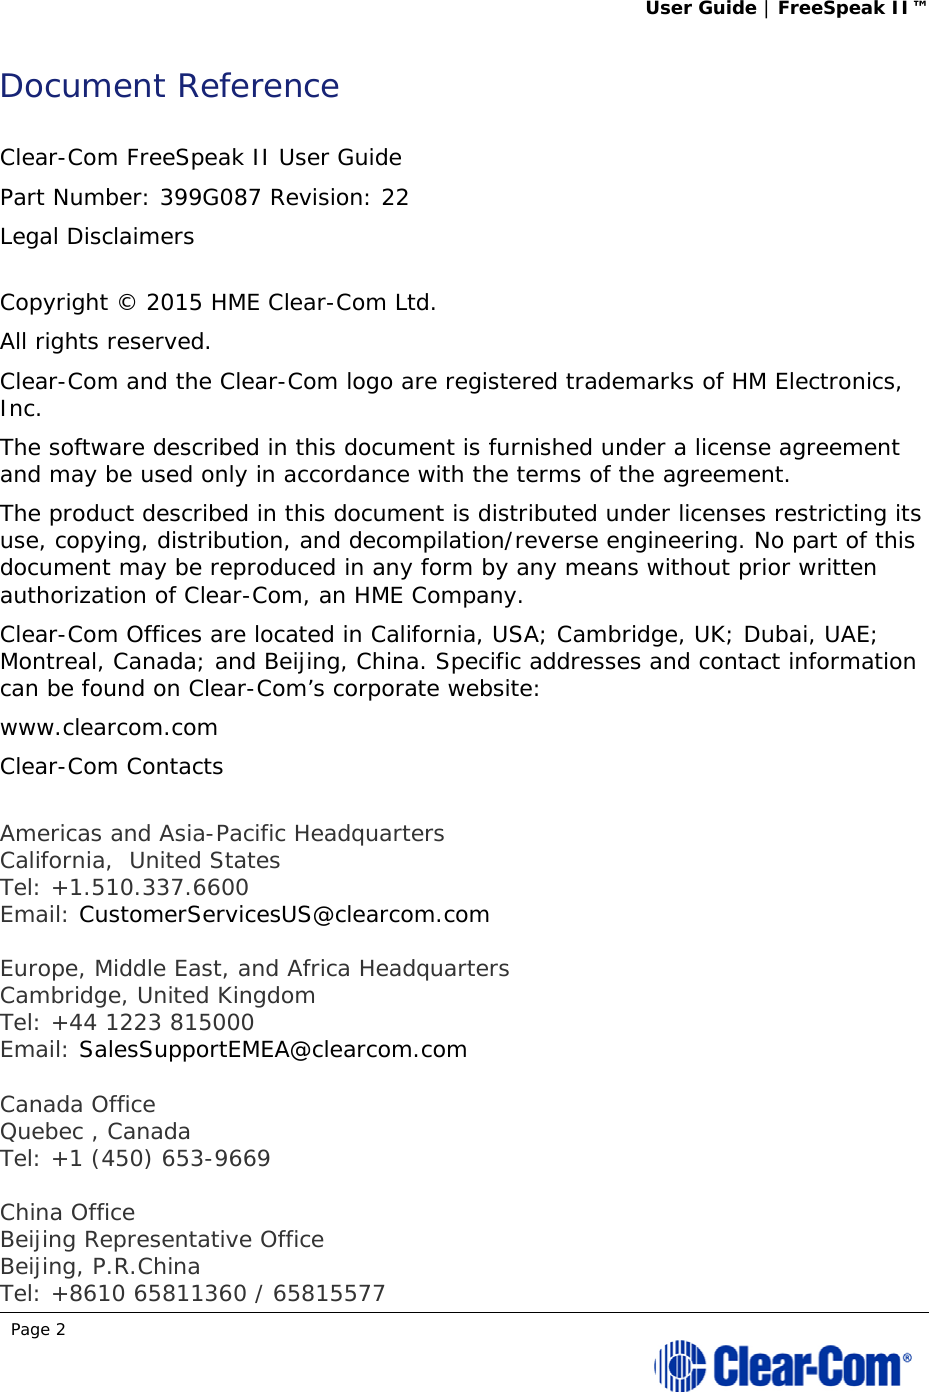 User Guide | FreeSpeak II™  Page 2  Document Reference  Clear-Com FreeSpeak II User Guide  Part Number: 399G087 Revision: 22 Legal Disclaimers  Copyright © 2015 HME Clear-Com Ltd. All rights reserved. Clear-Com and the Clear-Com logo are registered trademarks of HM Electronics, Inc. The software described in this document is furnished under a license agreement and may be used only in accordance with the terms of the agreement.  The product described in this document is distributed under licenses restricting its use, copying, distribution, and decompilation/reverse engineering. No part of this document may be reproduced in any form by any means without prior written authorization of Clear-Com, an HME Company. Clear-Com Offices are located in California, USA; Cambridge, UK; Dubai, UAE; Montreal, Canada; and Beijing, China. Specific addresses and contact information can be found on Clear-Com’s corporate website: www.clearcom.com Clear-Com Contacts  Americas and Asia-Pacific Headquarters California,  United States Tel: +1.510.337.6600 Email: CustomerServicesUS@clearcom.com  Europe, Middle East, and Africa Headquarters Cambridge, United Kingdom Tel: +44 1223 815000 Email: SalesSupportEMEA@clearcom.com  Canada Office Quebec , Canada Tel: +1 (450) 653-9669  China Office Beijing Representative Office Beijing, P.R.China Tel: +8610 65811360 / 65815577 